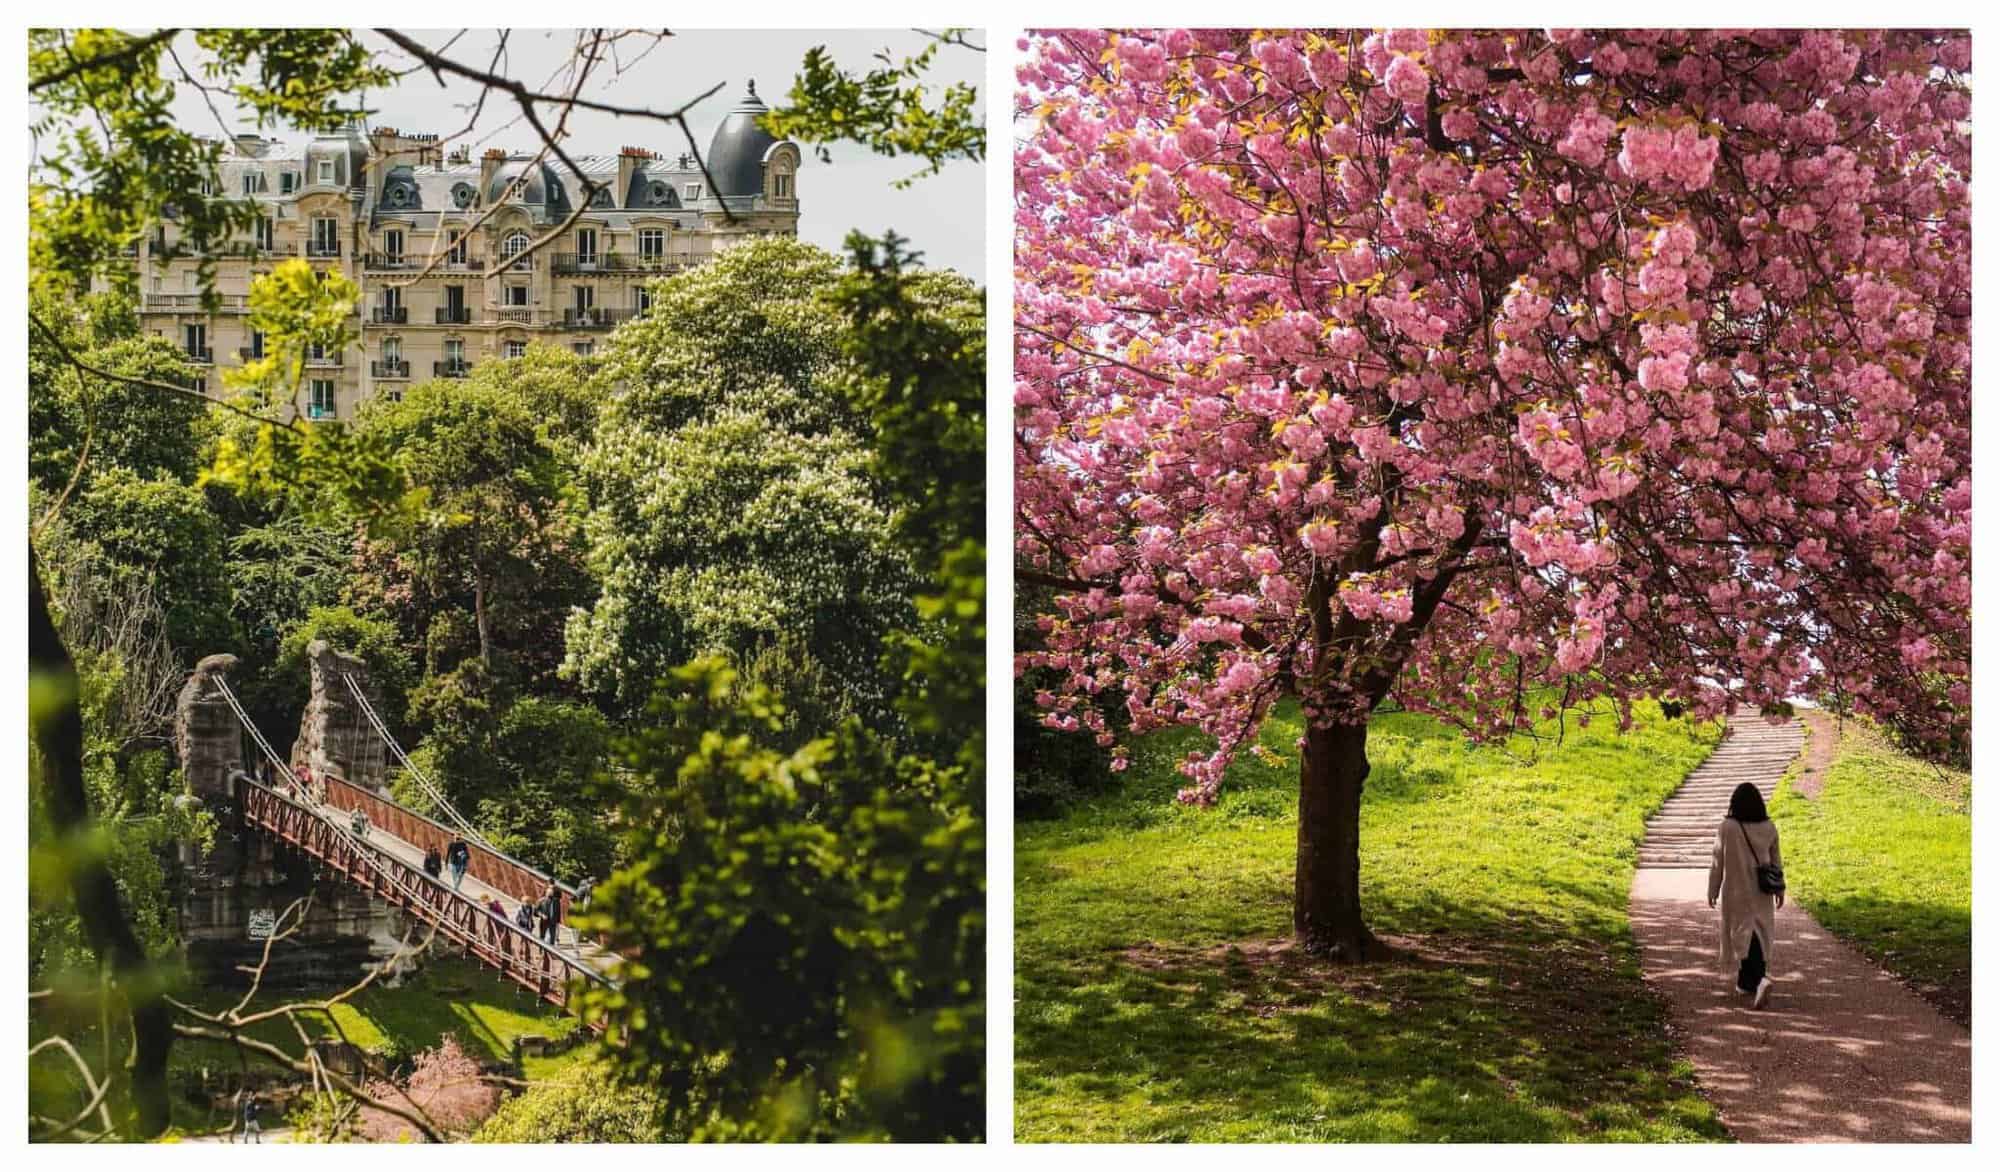 Left: Parc des Buttes-Chaumont's Passerelle Suspendue or suspended bridge is surrounded by a lot of green trees; Right: A woman walks by a pink cherry blossom tree in full bloom on a lovely spring day.